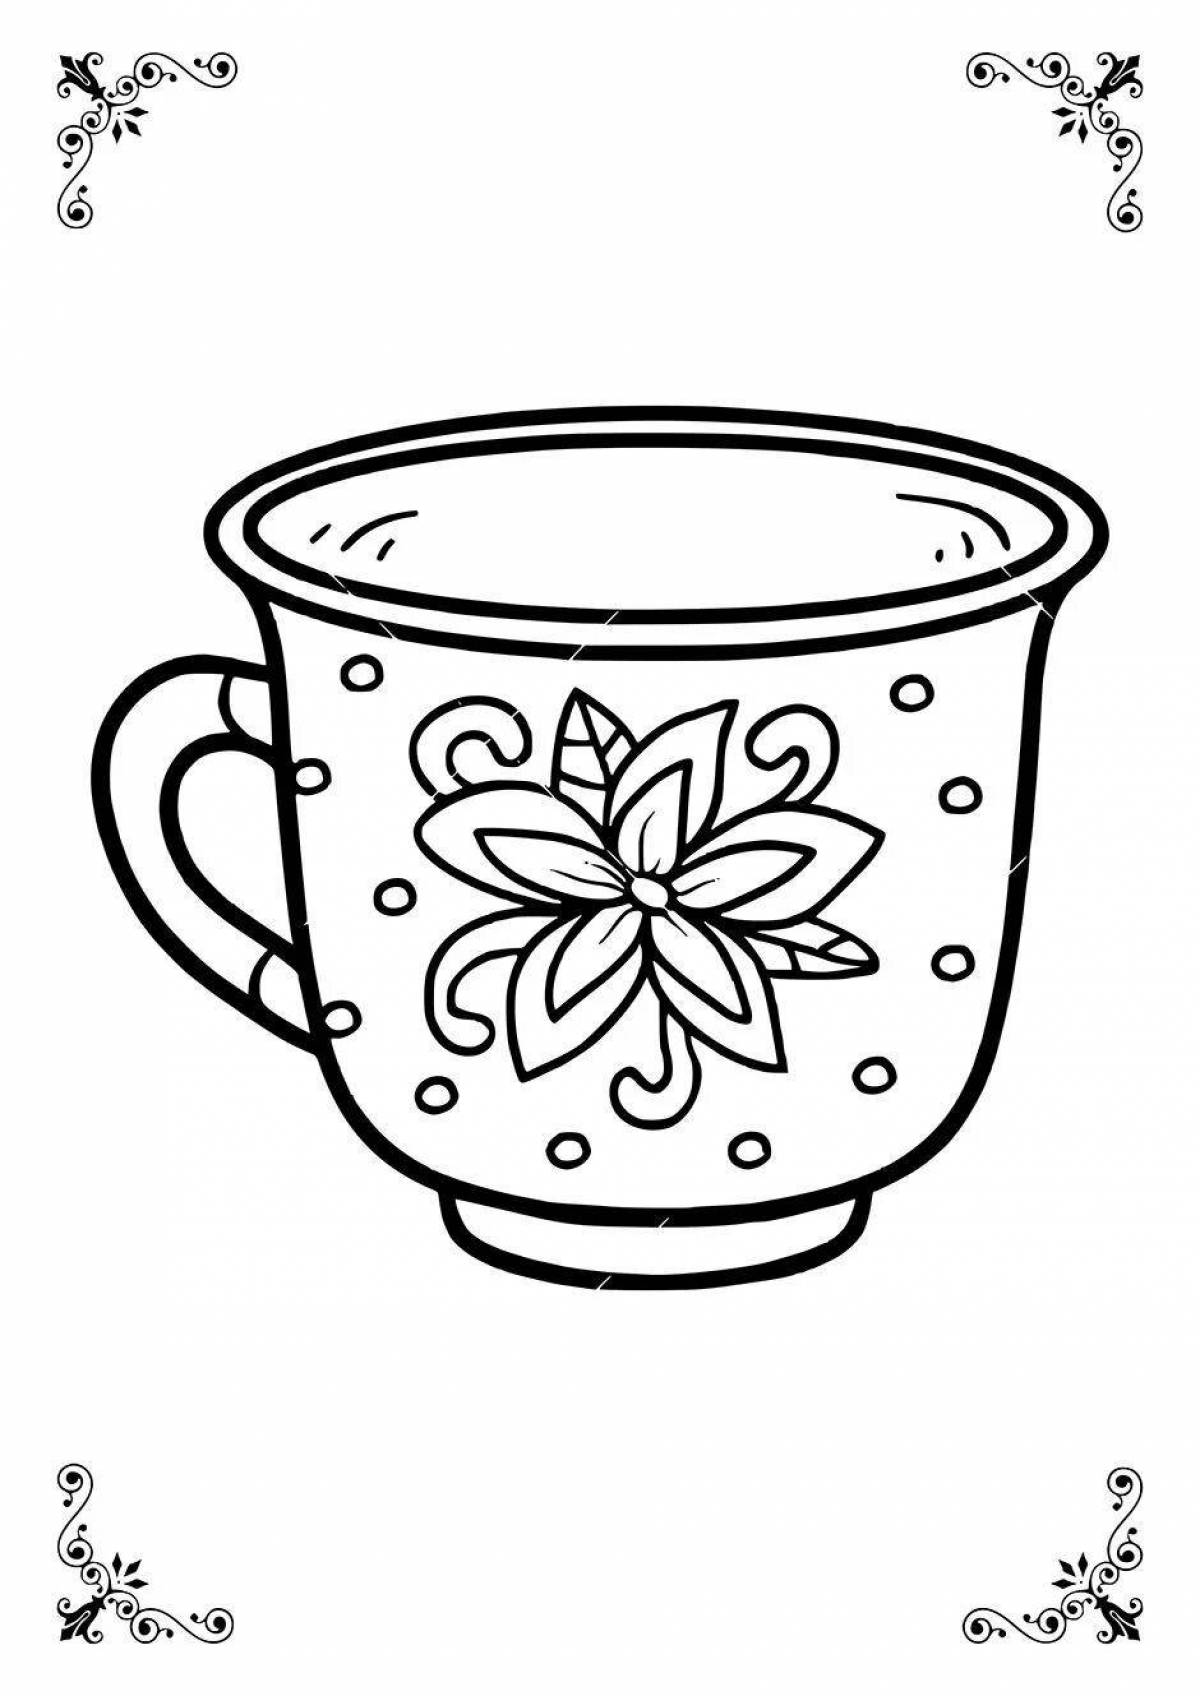 Coloring book dazzling cup for kids